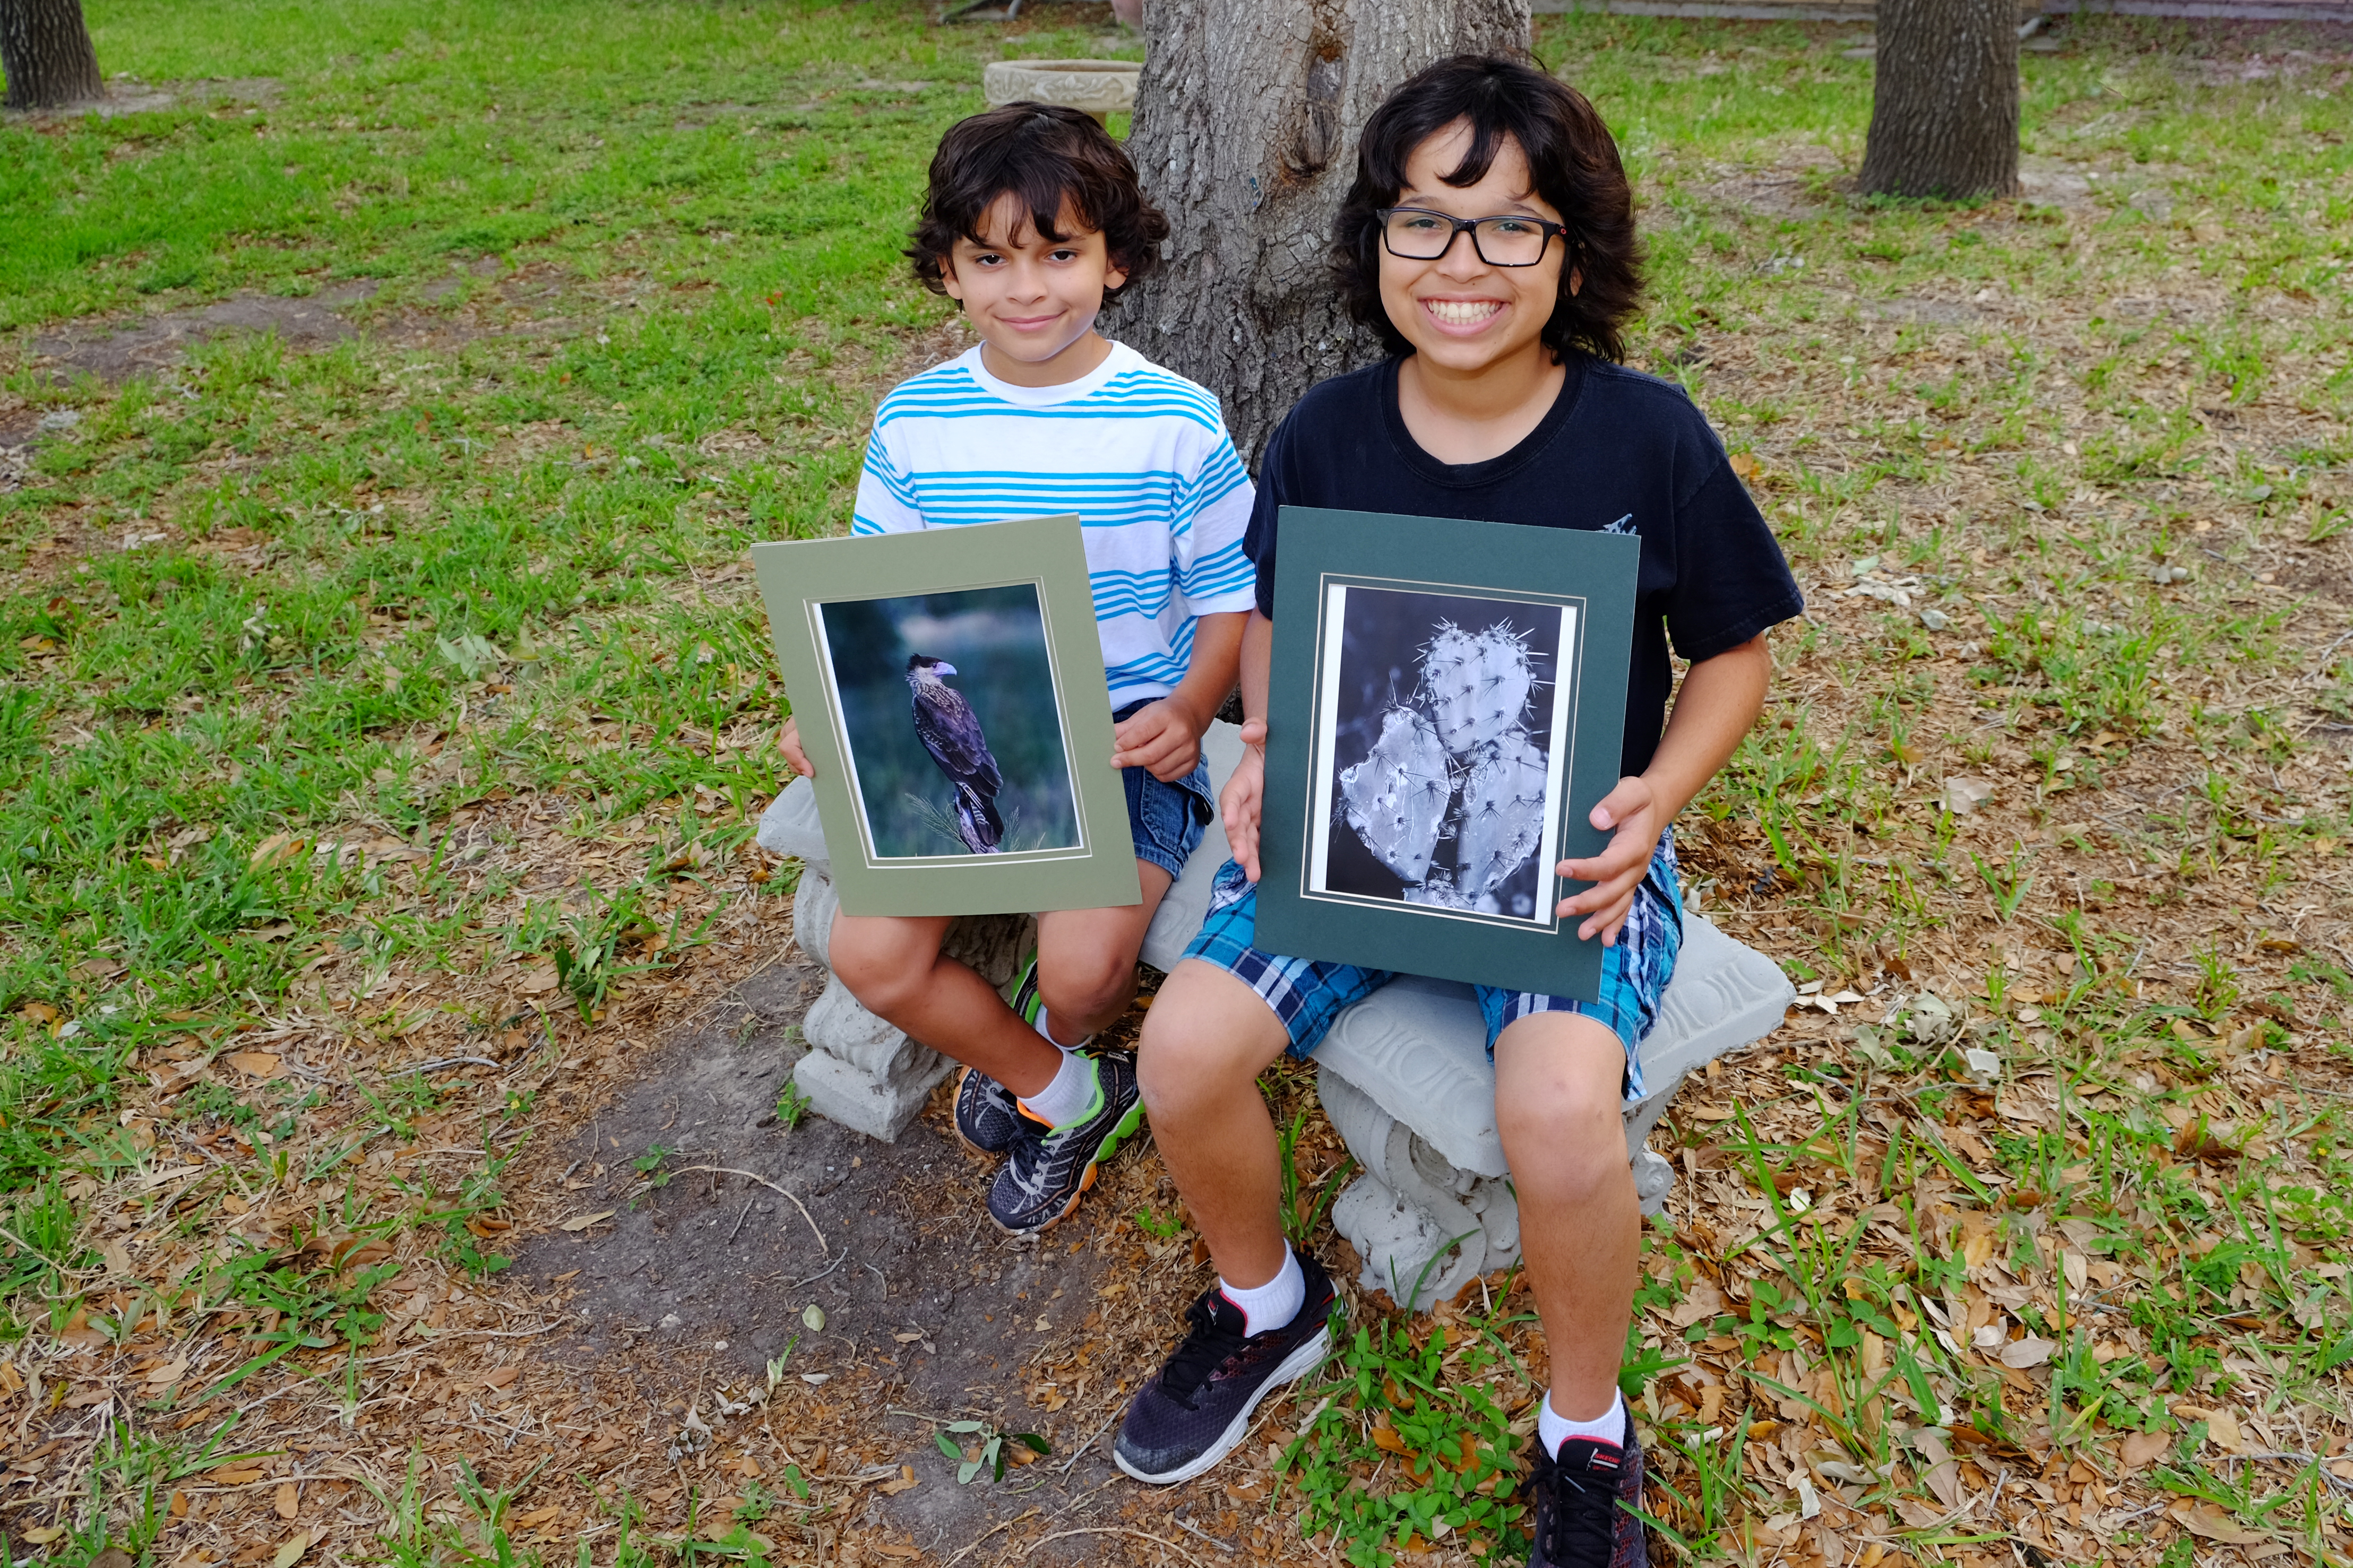 Treasure Hills Elementary brothers recognized by Texas Youth Creators Awards